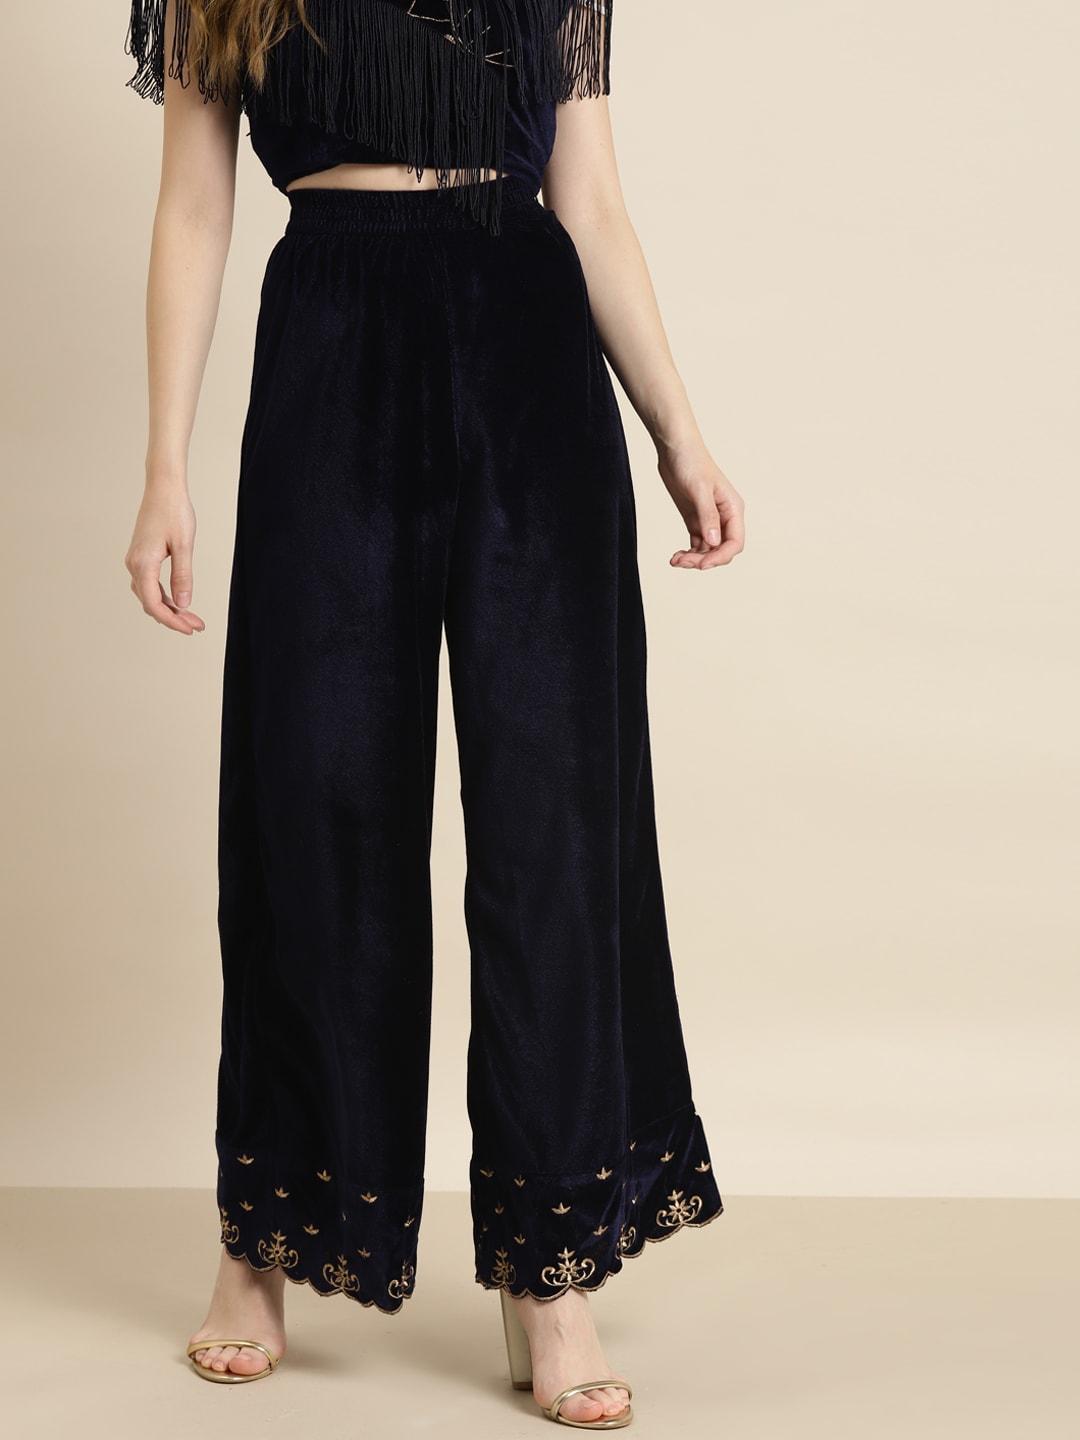 shae-by-sassafras-women-navy-blue-embroidered-parallel-trousers